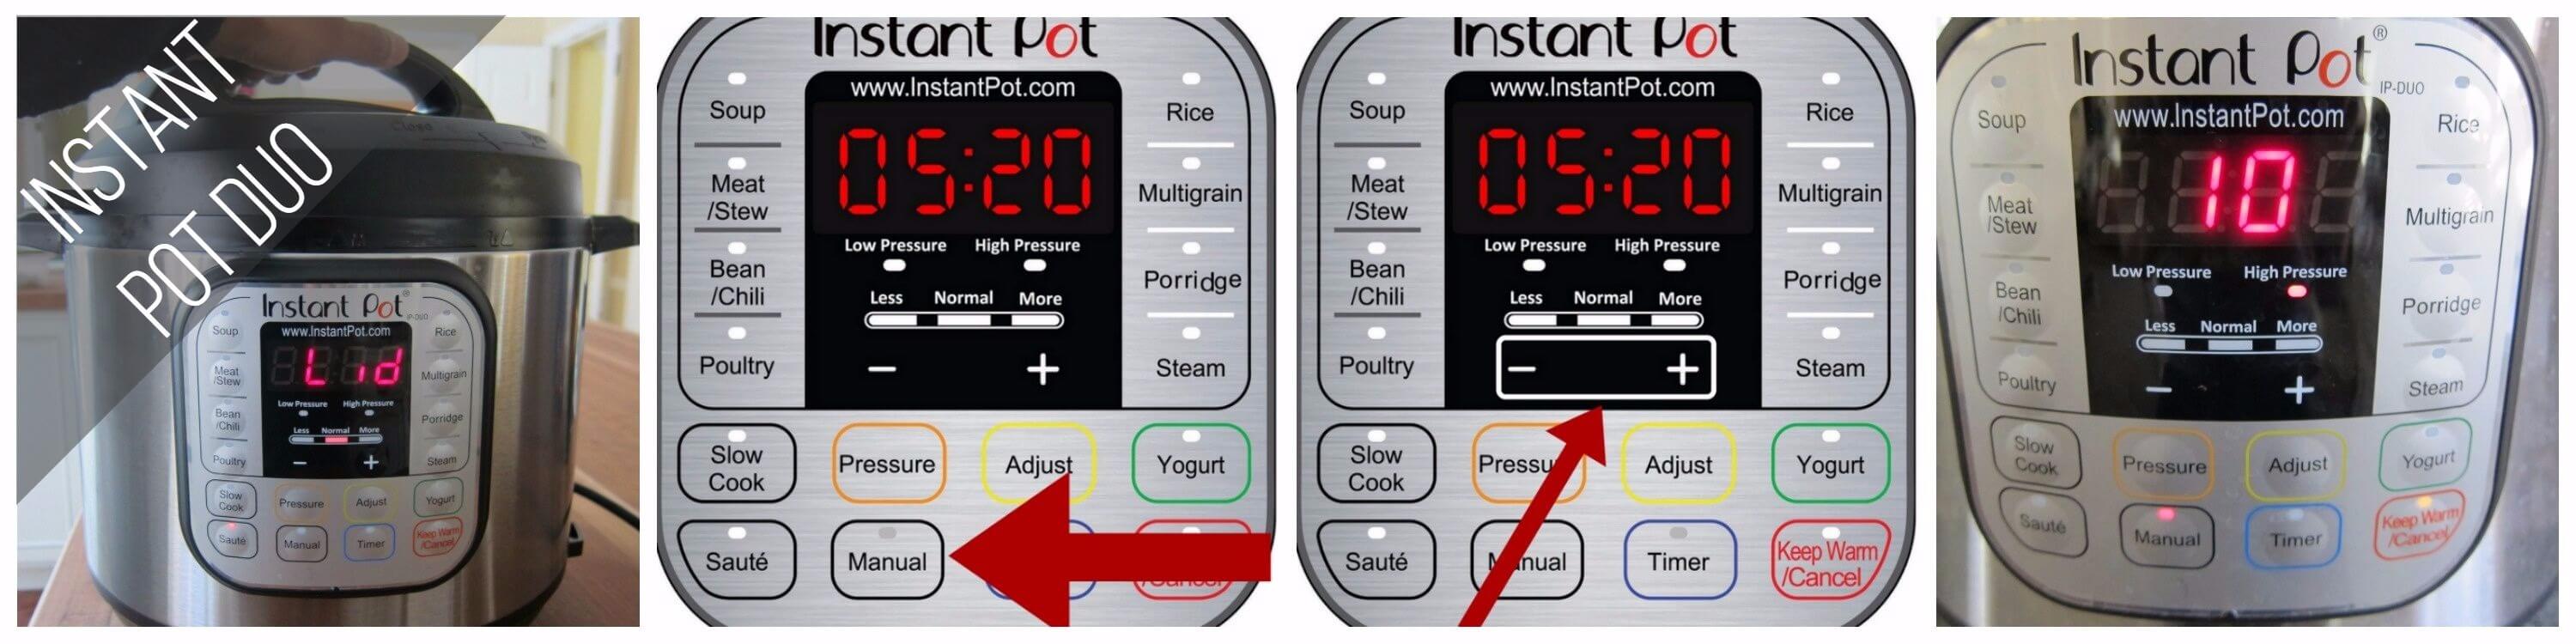 Instant Pot Duo Manual mode 10 minutes collage - close lid, press manual, press - or +, display shows 10- Paint the Kitchen Red